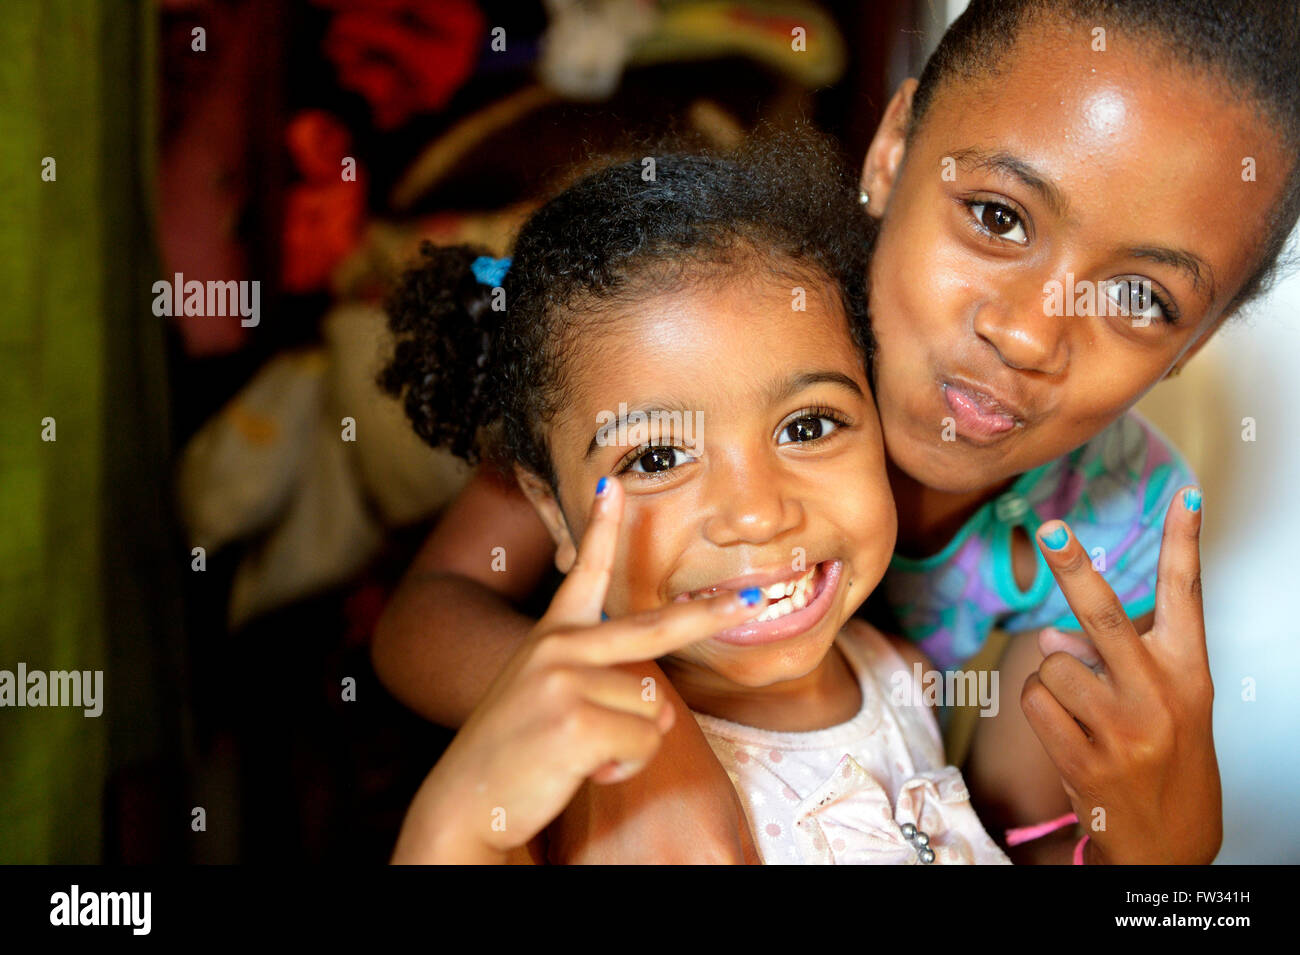 Two girls, 3 and 10 years, in a favela, Favela 21 de Abril, São Paulo, Brazil Stock Photo